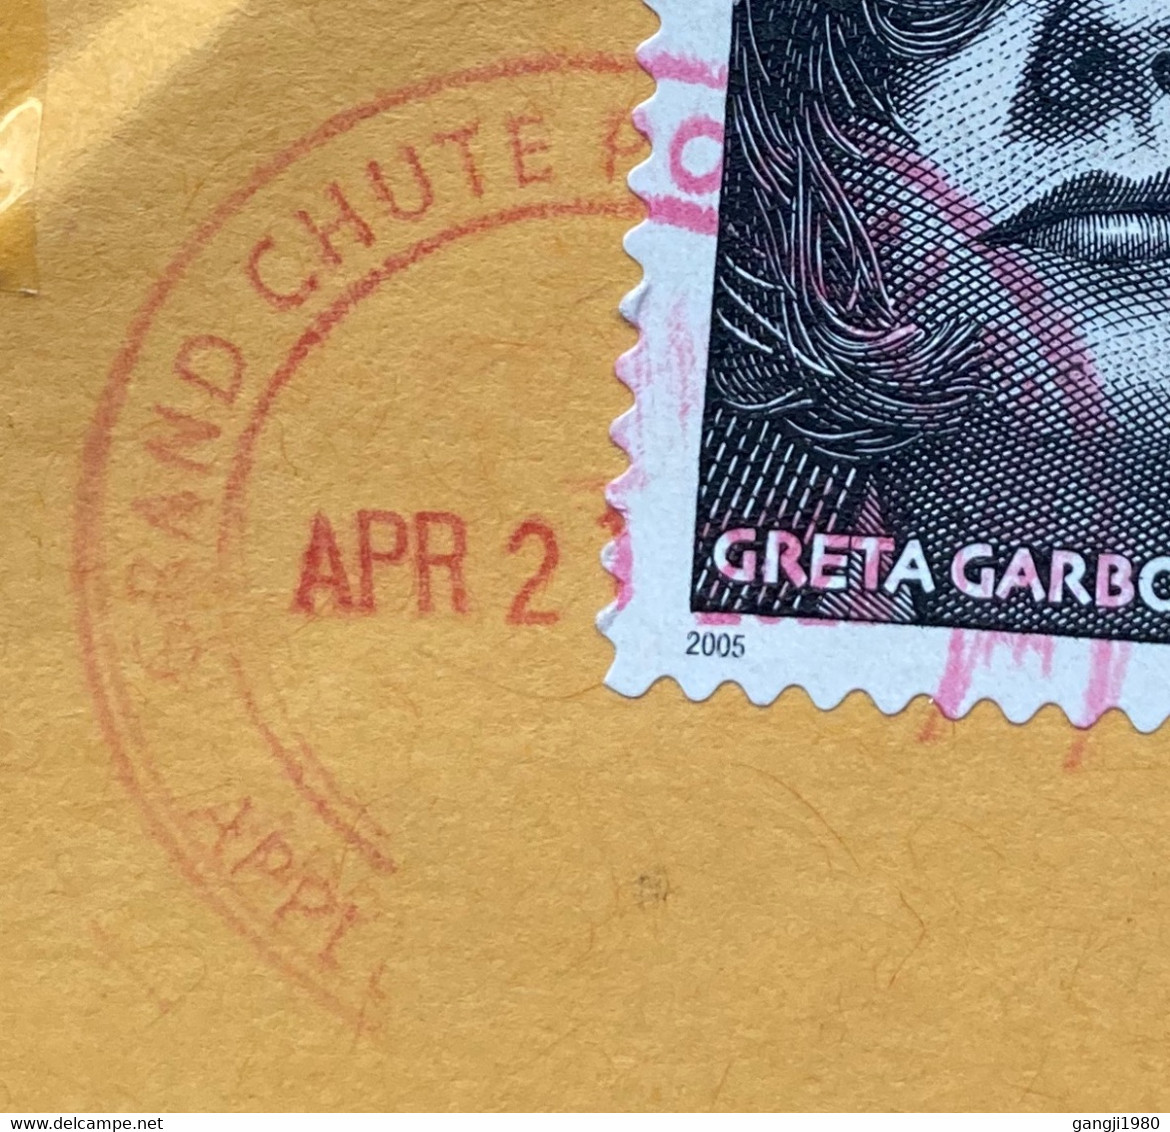 USA 2022, GRETA GARBO ,BETTE DEVIS, BULLRUN, FORT SUMTER 12 STAMPS USED COVER TO INDIA, GRAND CHUTE P.O .CANCELLATION - Lettres & Documents